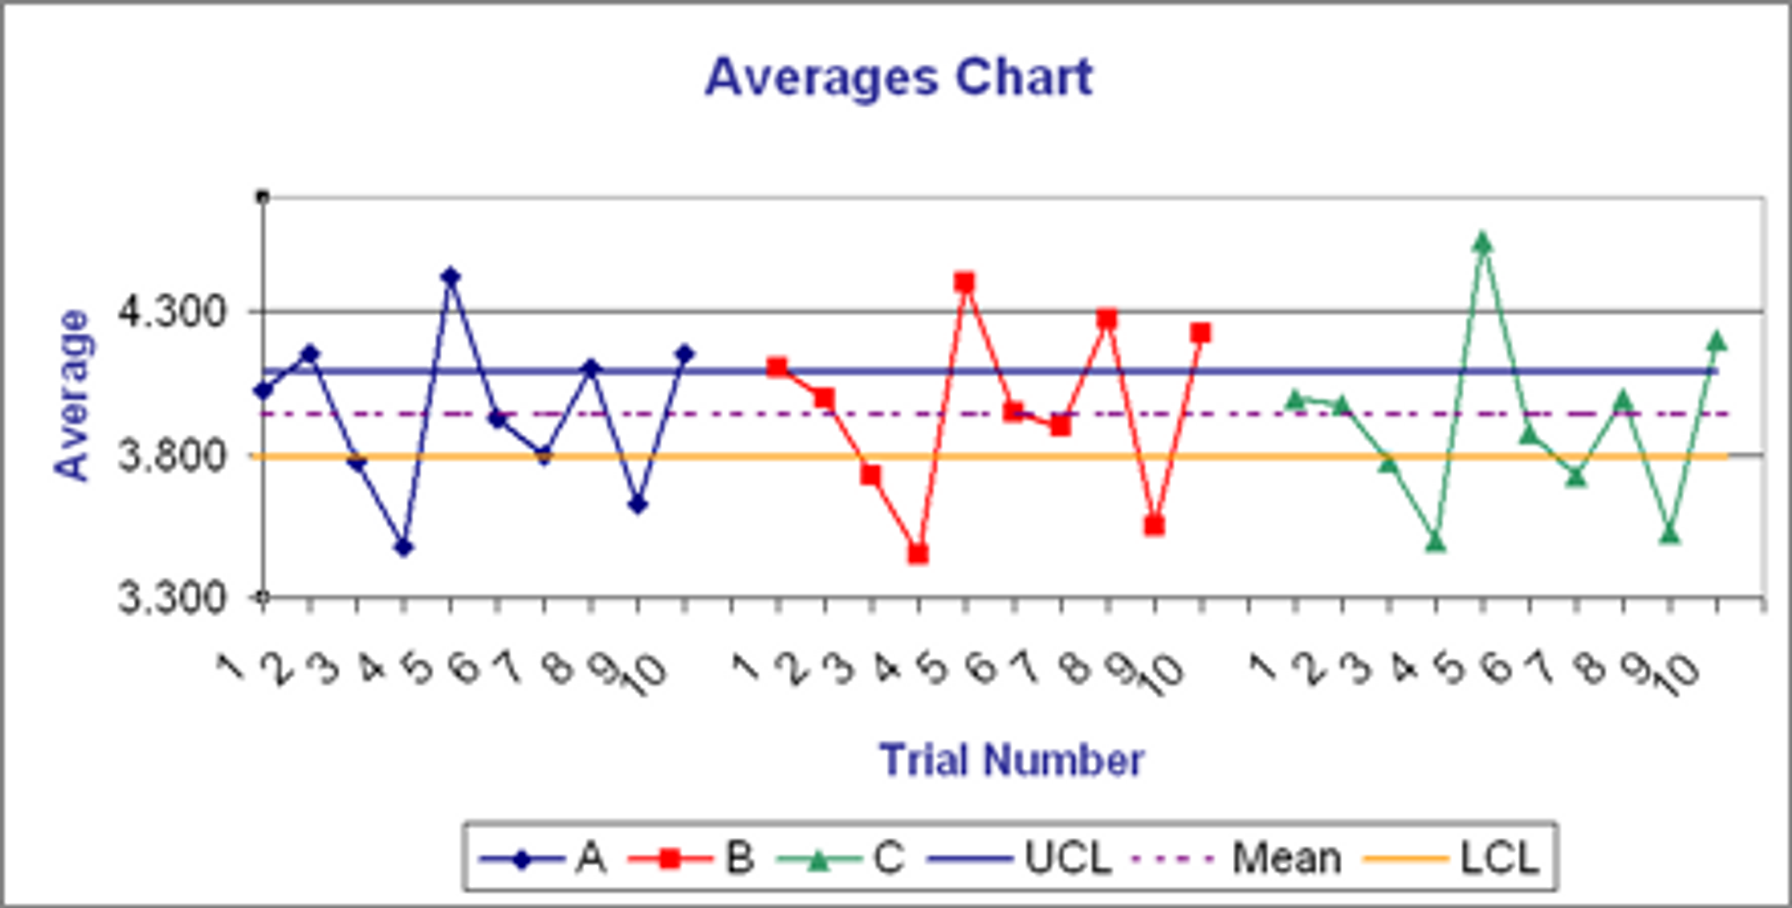 Averages chart showing different line graphs for 3 groups